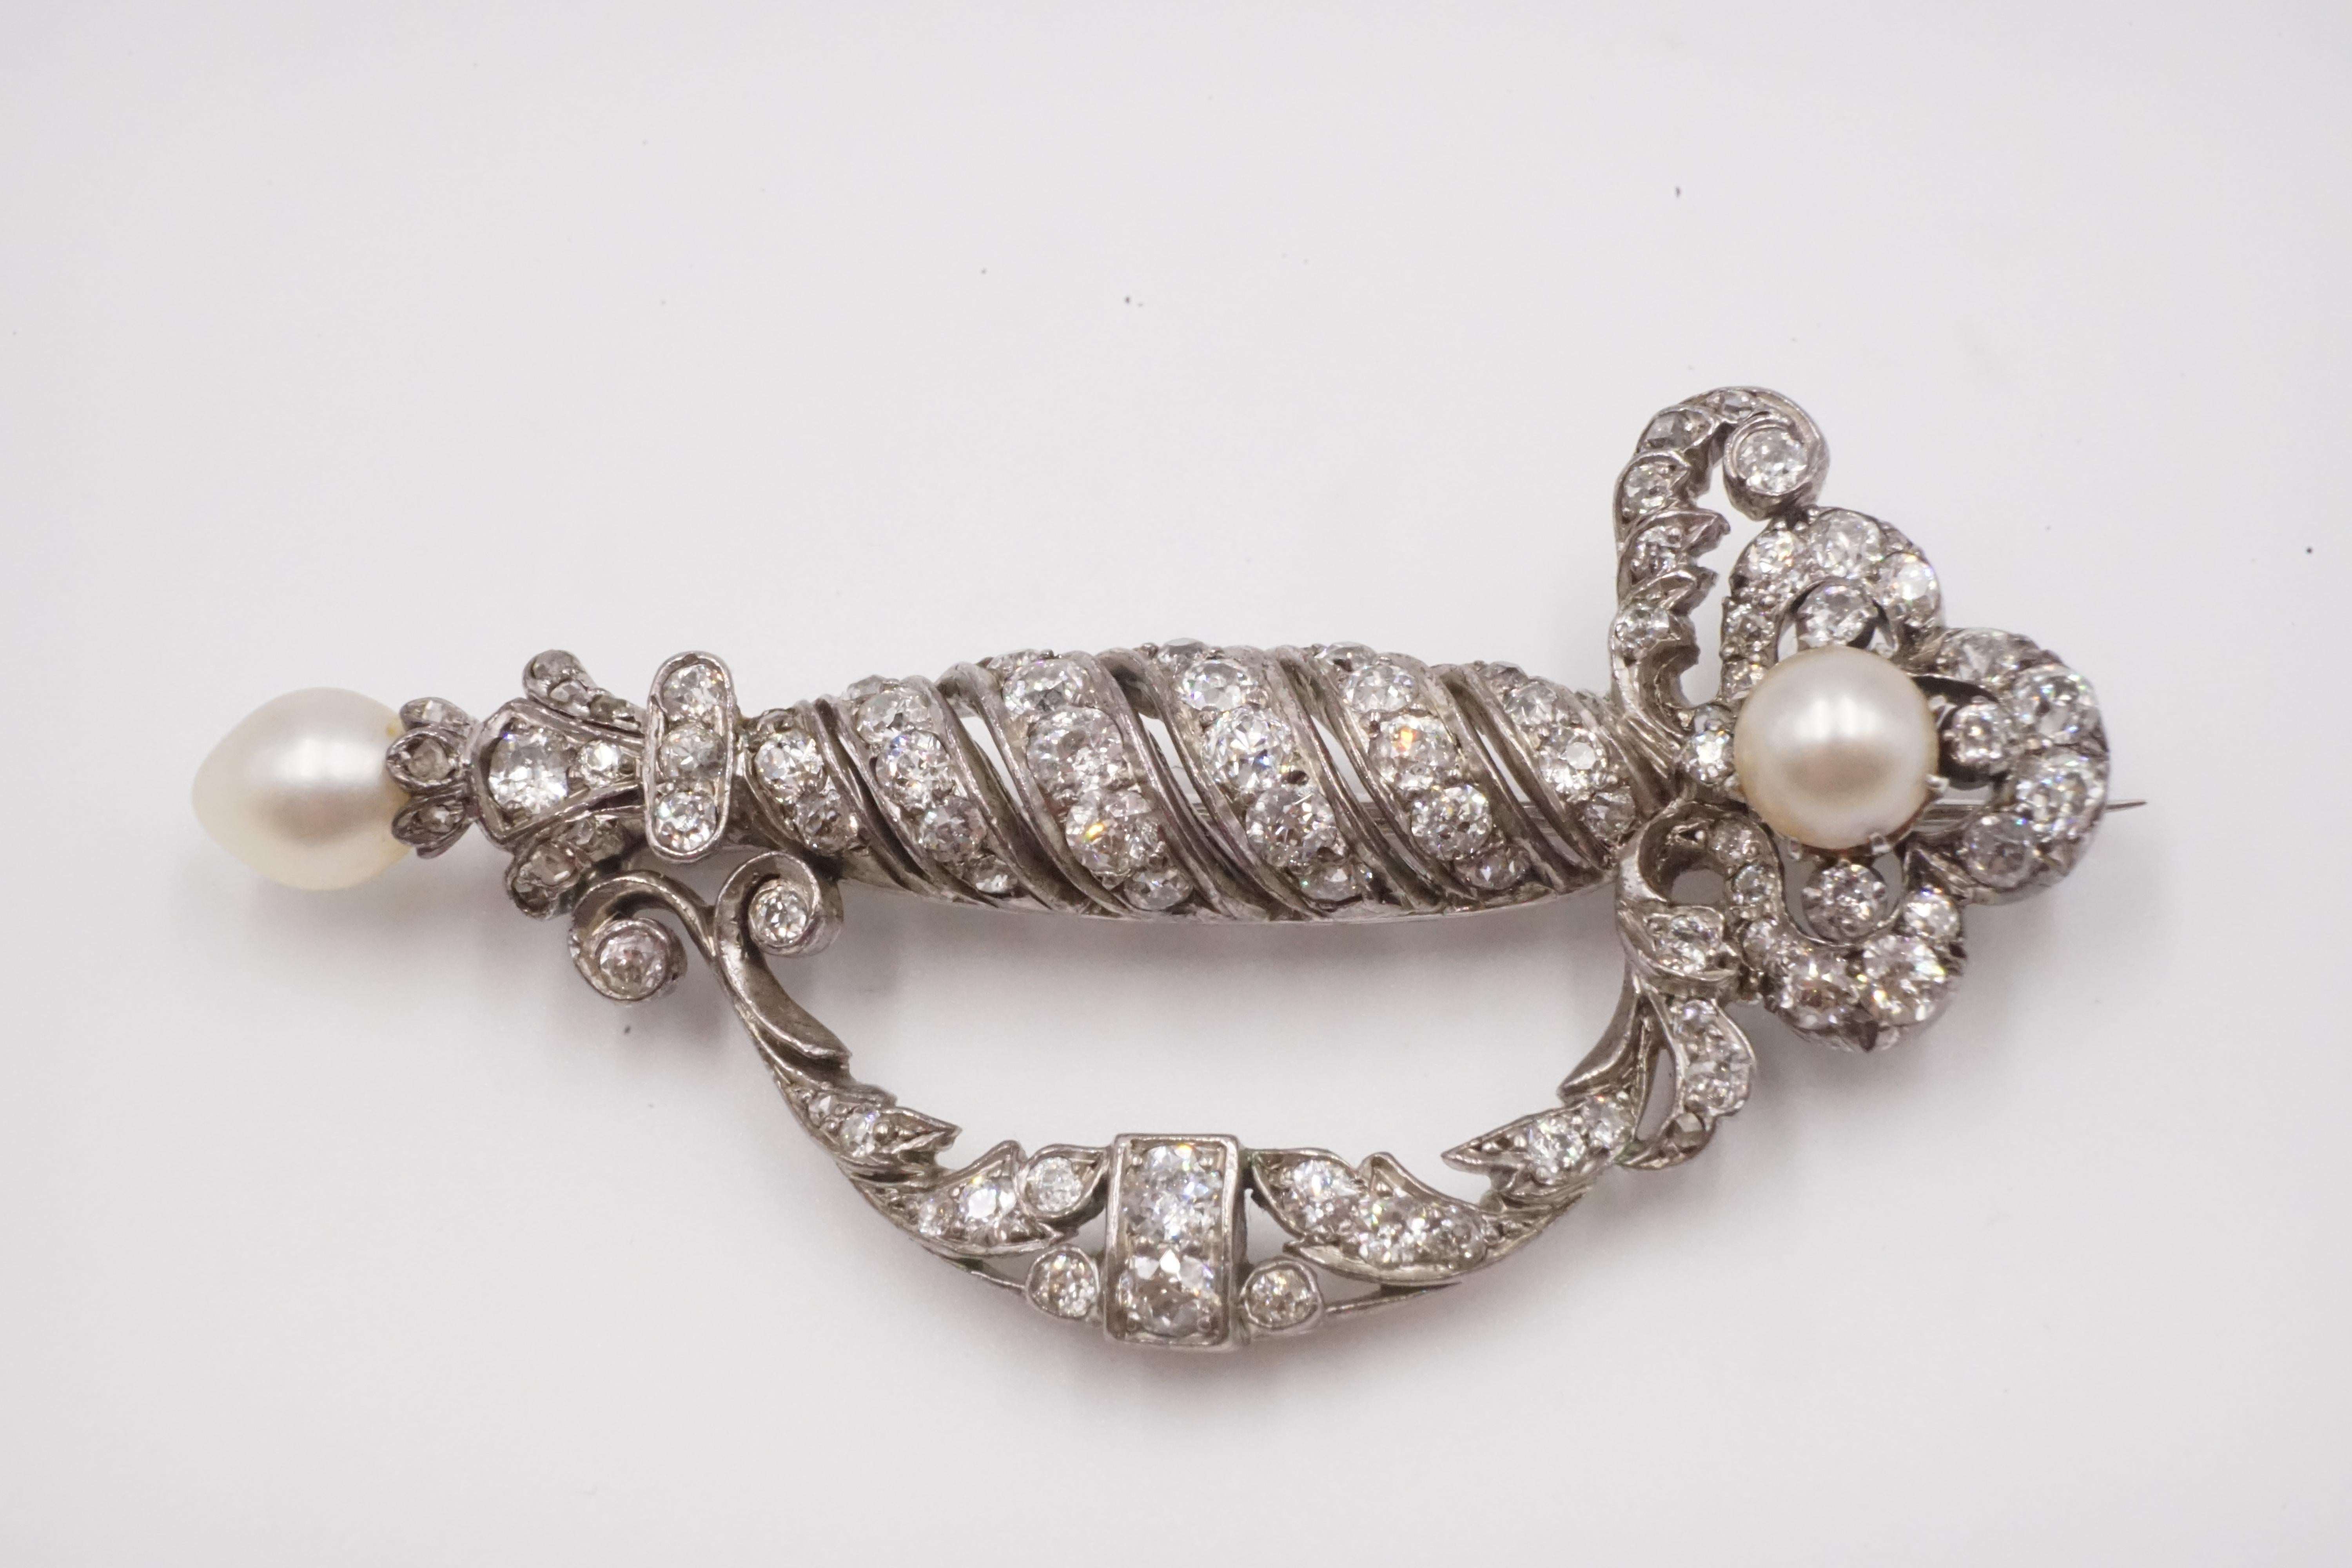 A ceremonial sword shaped Edwardian natural pearl, diamond and platinum brooch the tip and the grip of the sword have 2 natural pearls the diamonds are rose and old cut diamonds.

Measures W:6.2cm H:3.1cm D:1.2cm

Weight: 14.1g